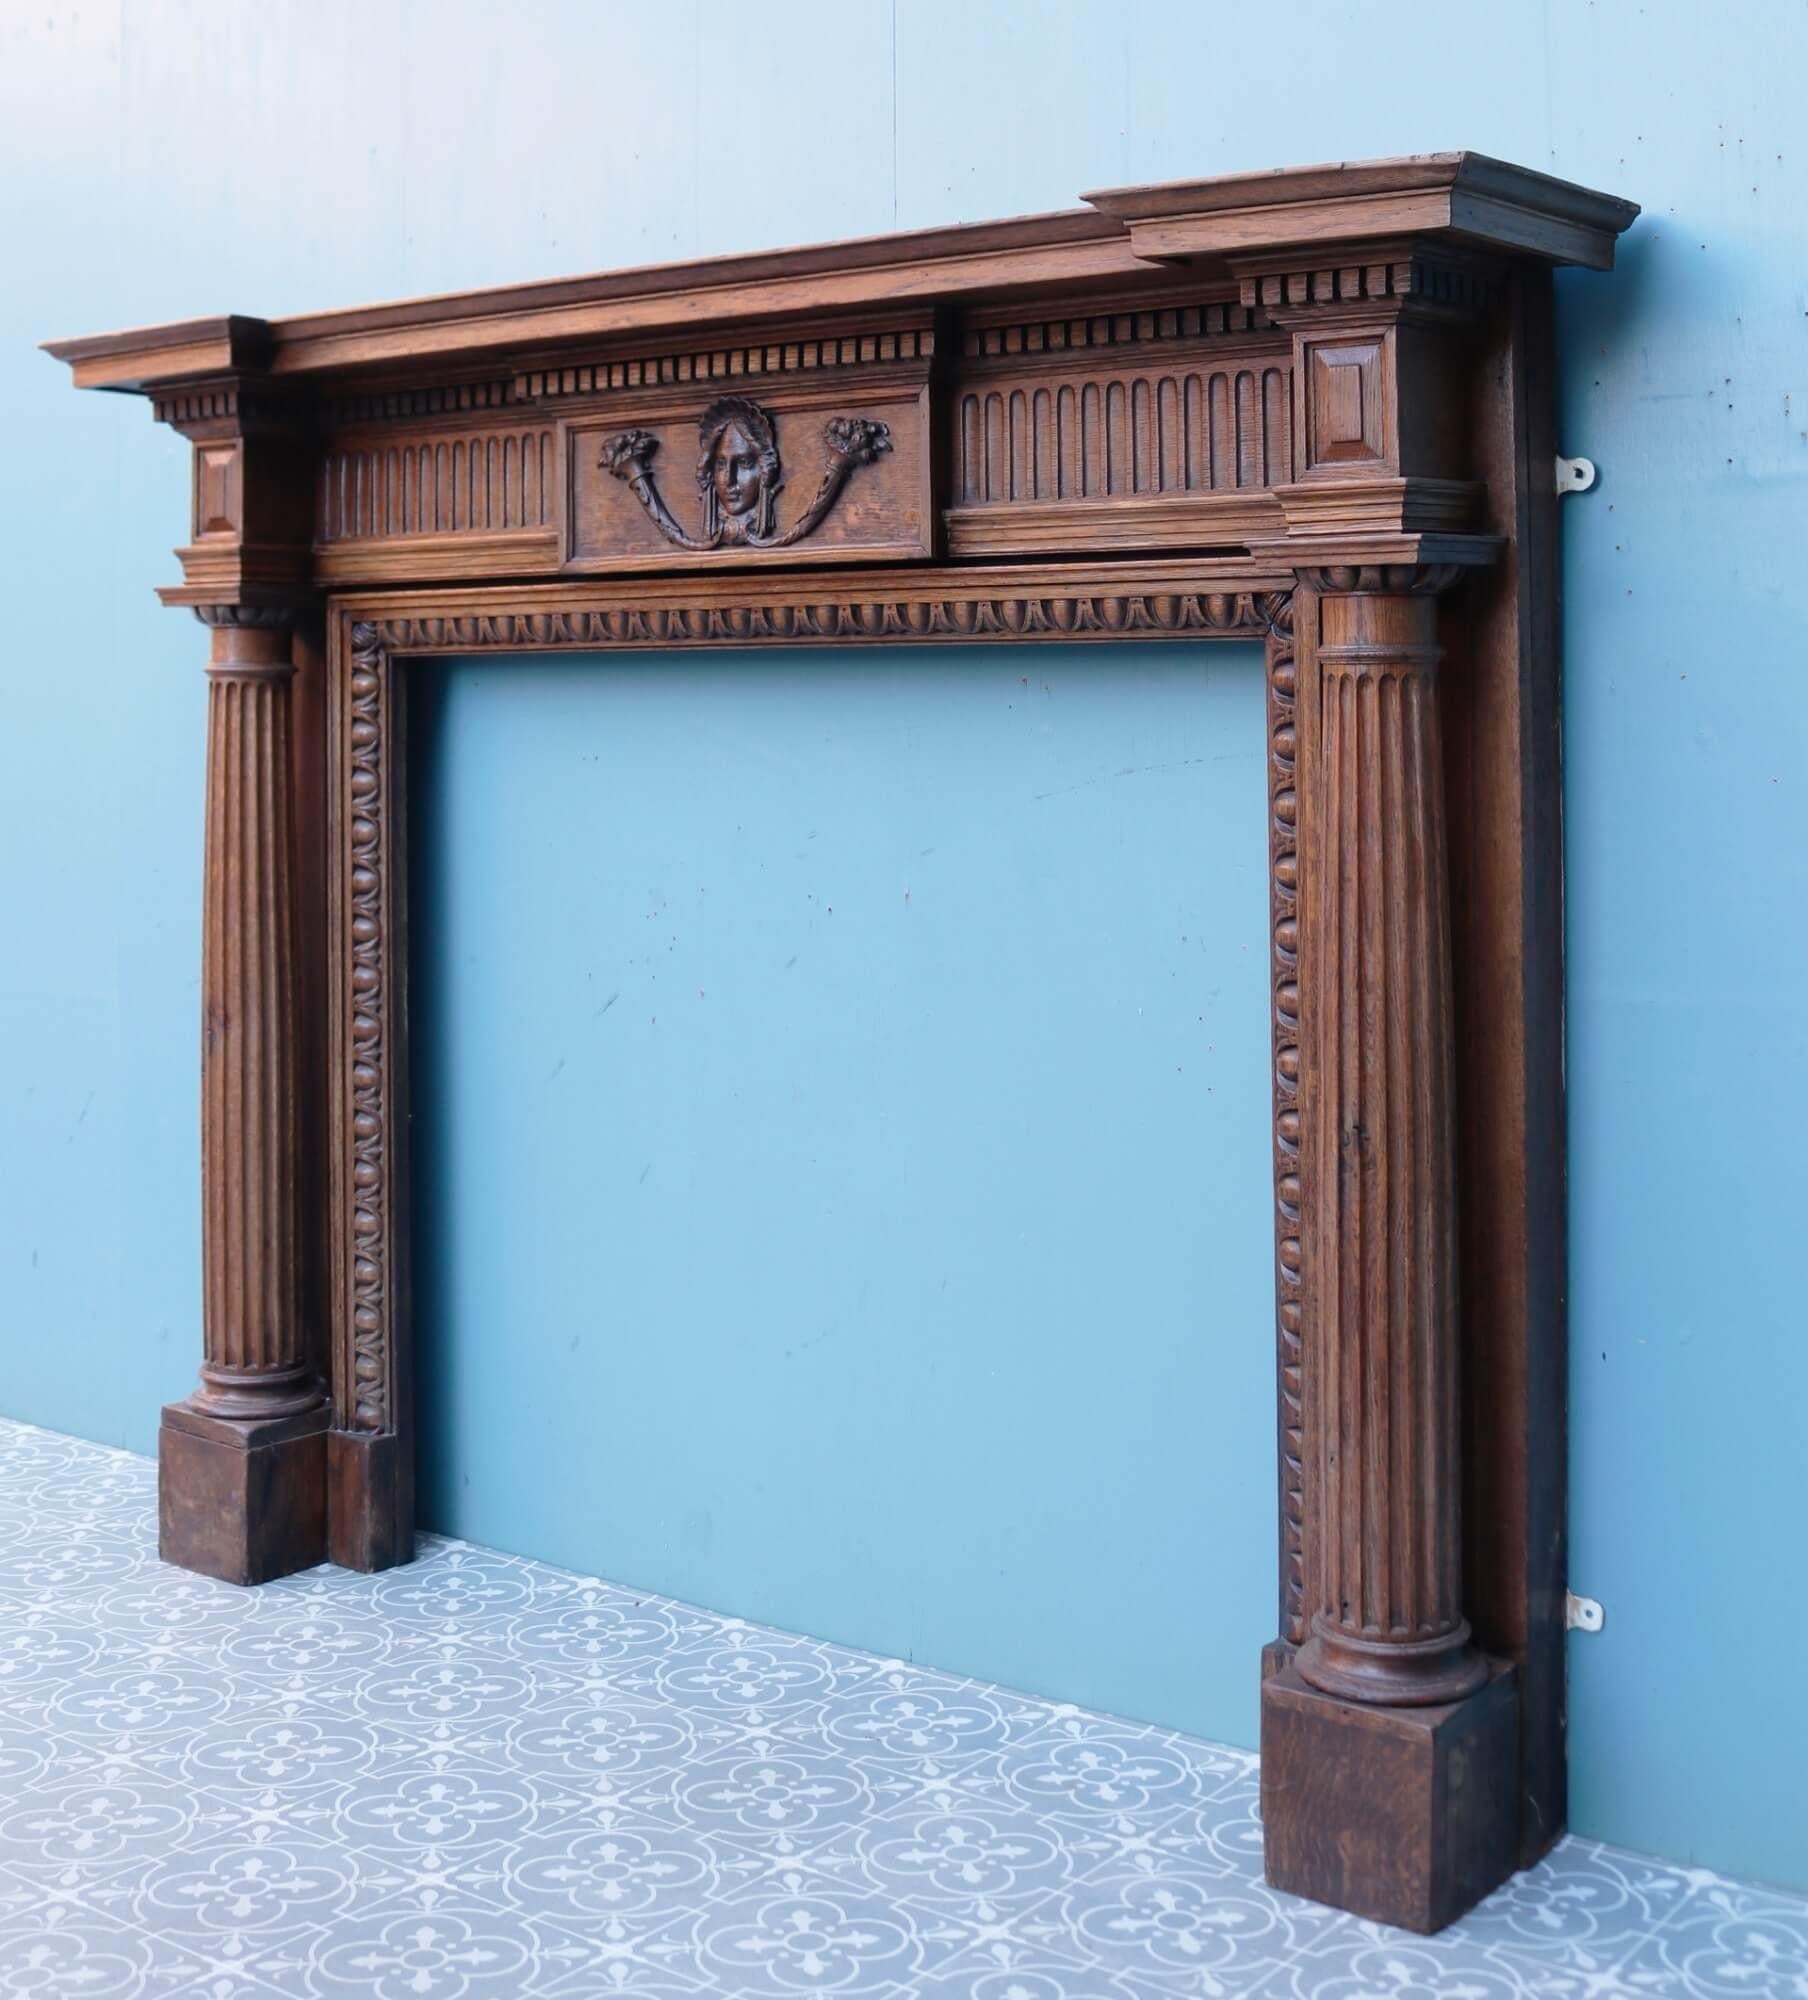 With its beautifully hand carved tablet and intricate details, this wooden mantel in the Georgian style is a spectacular surround for a large room. It features a rich caramel brown colour that instils a space with warmth and highly decorative carved